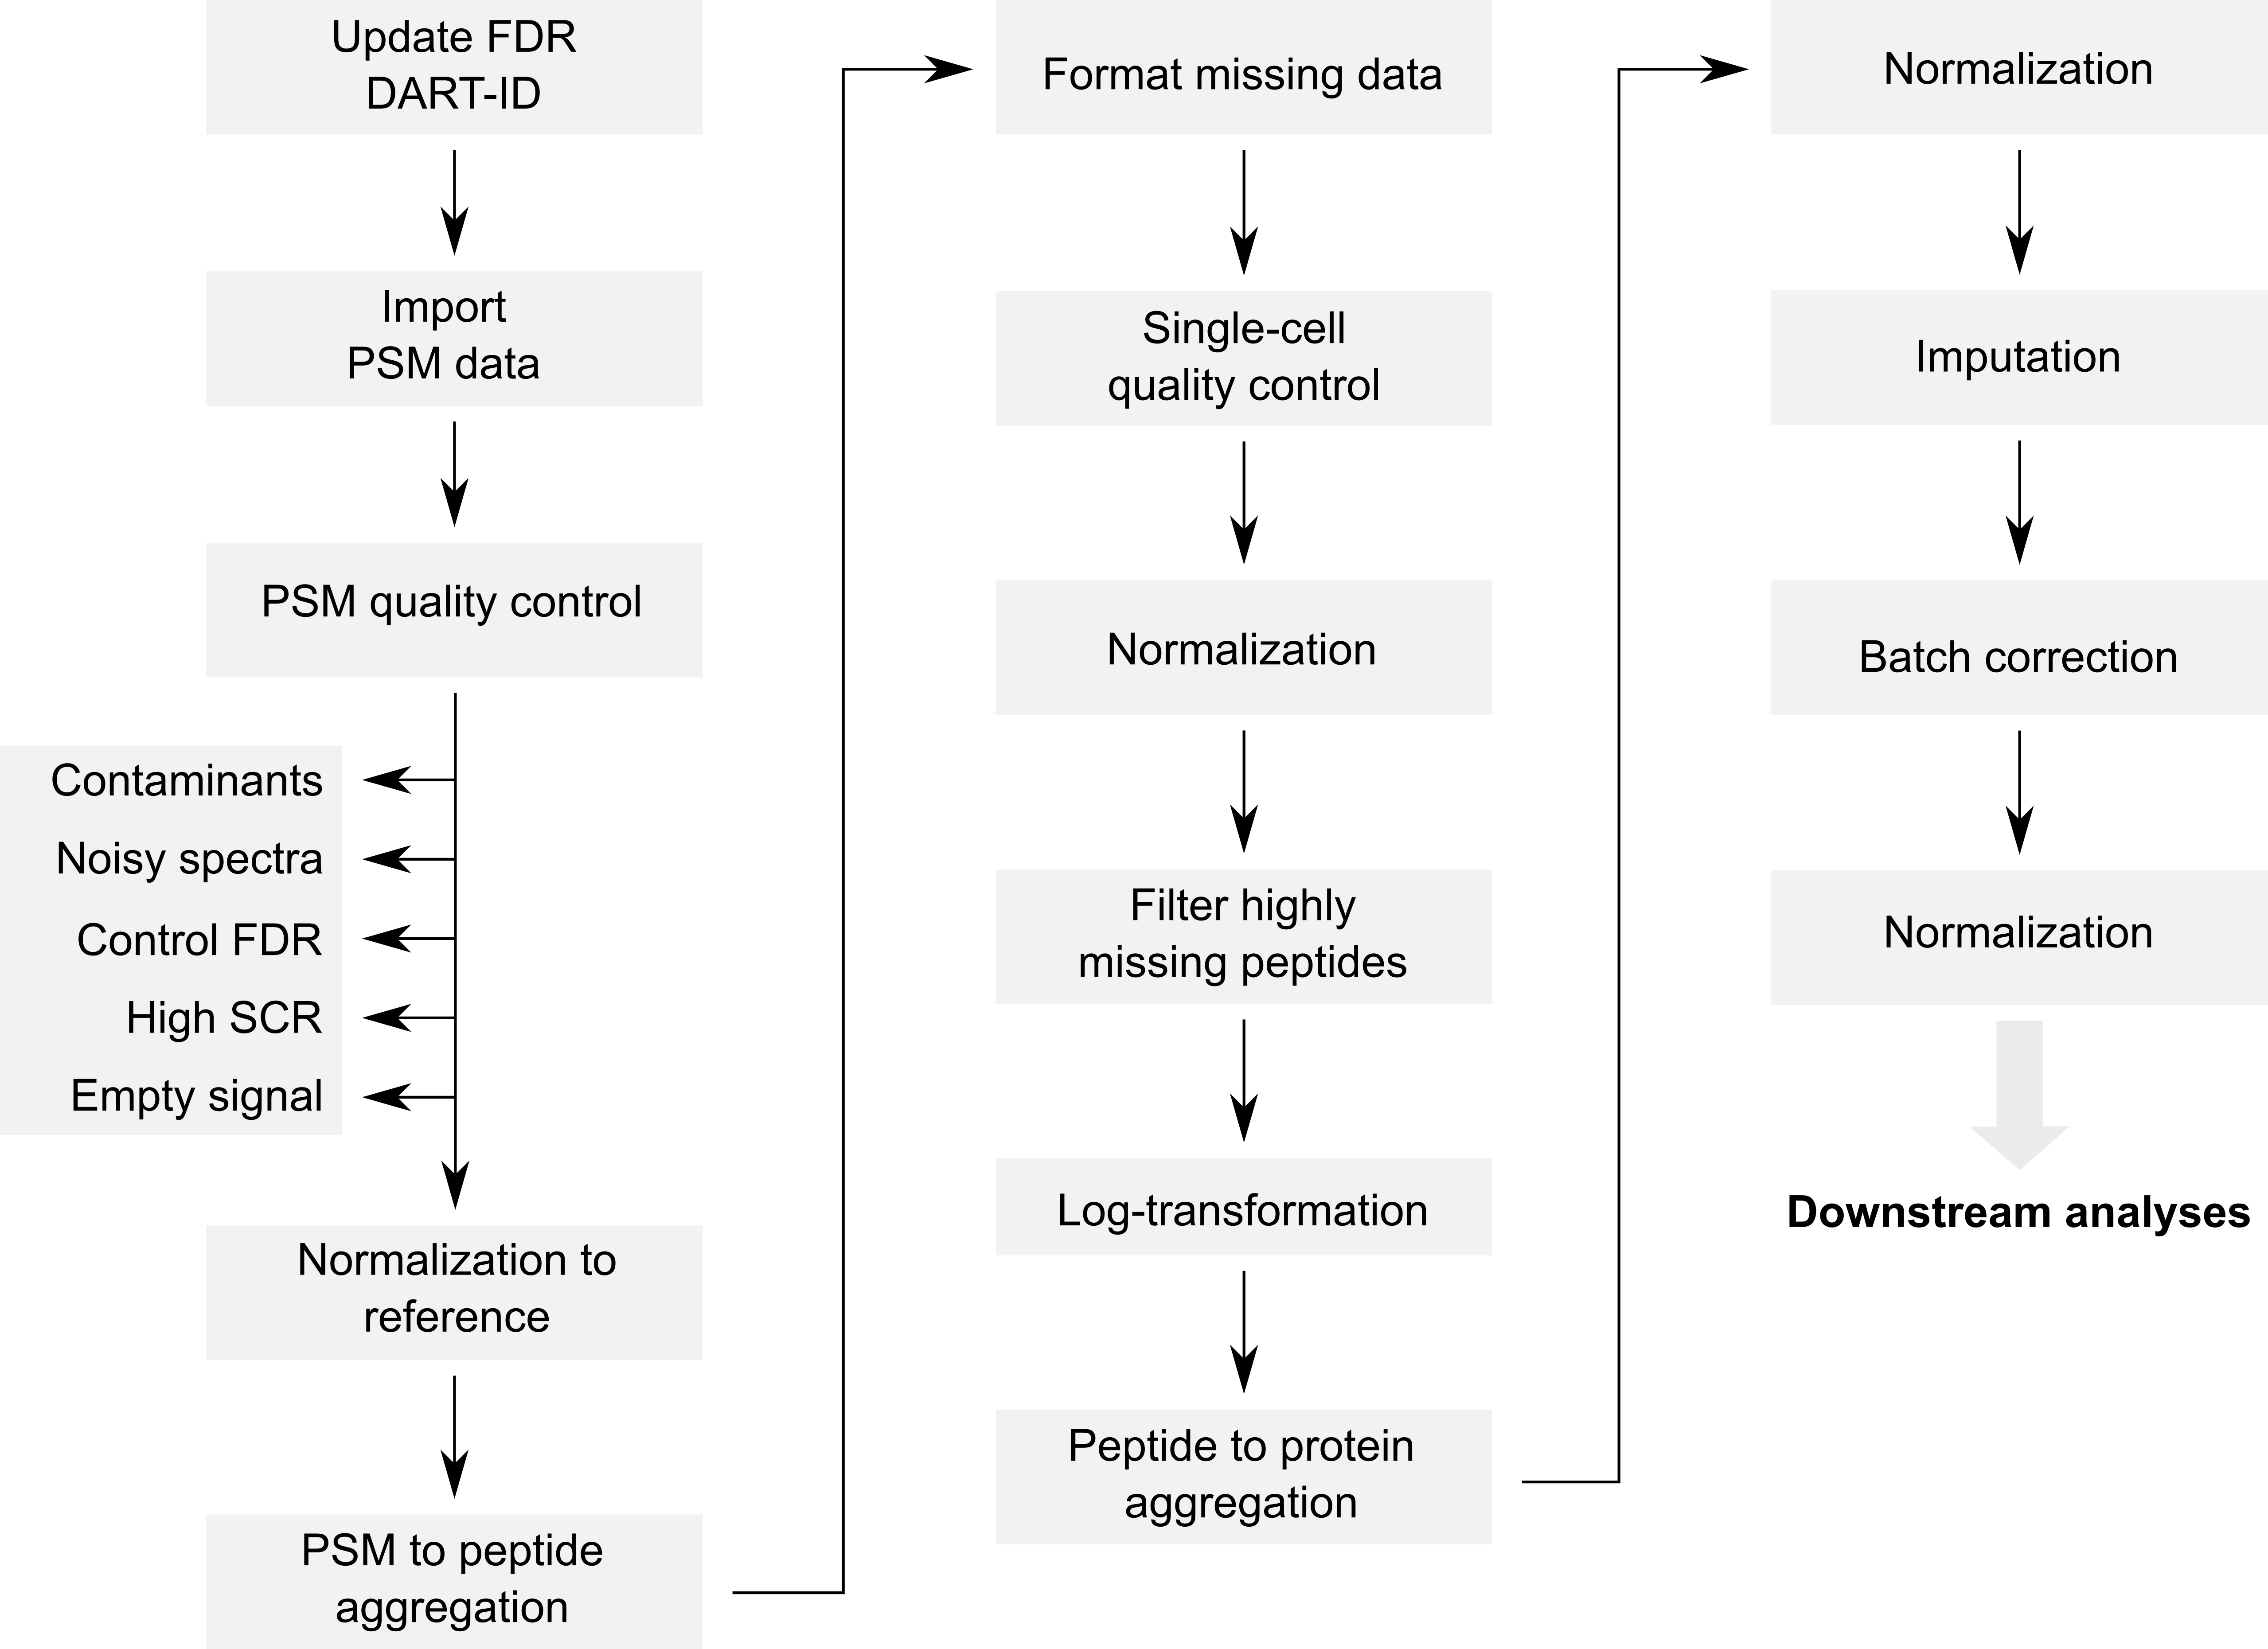 Overview of the processing workflow by Leduc et al.